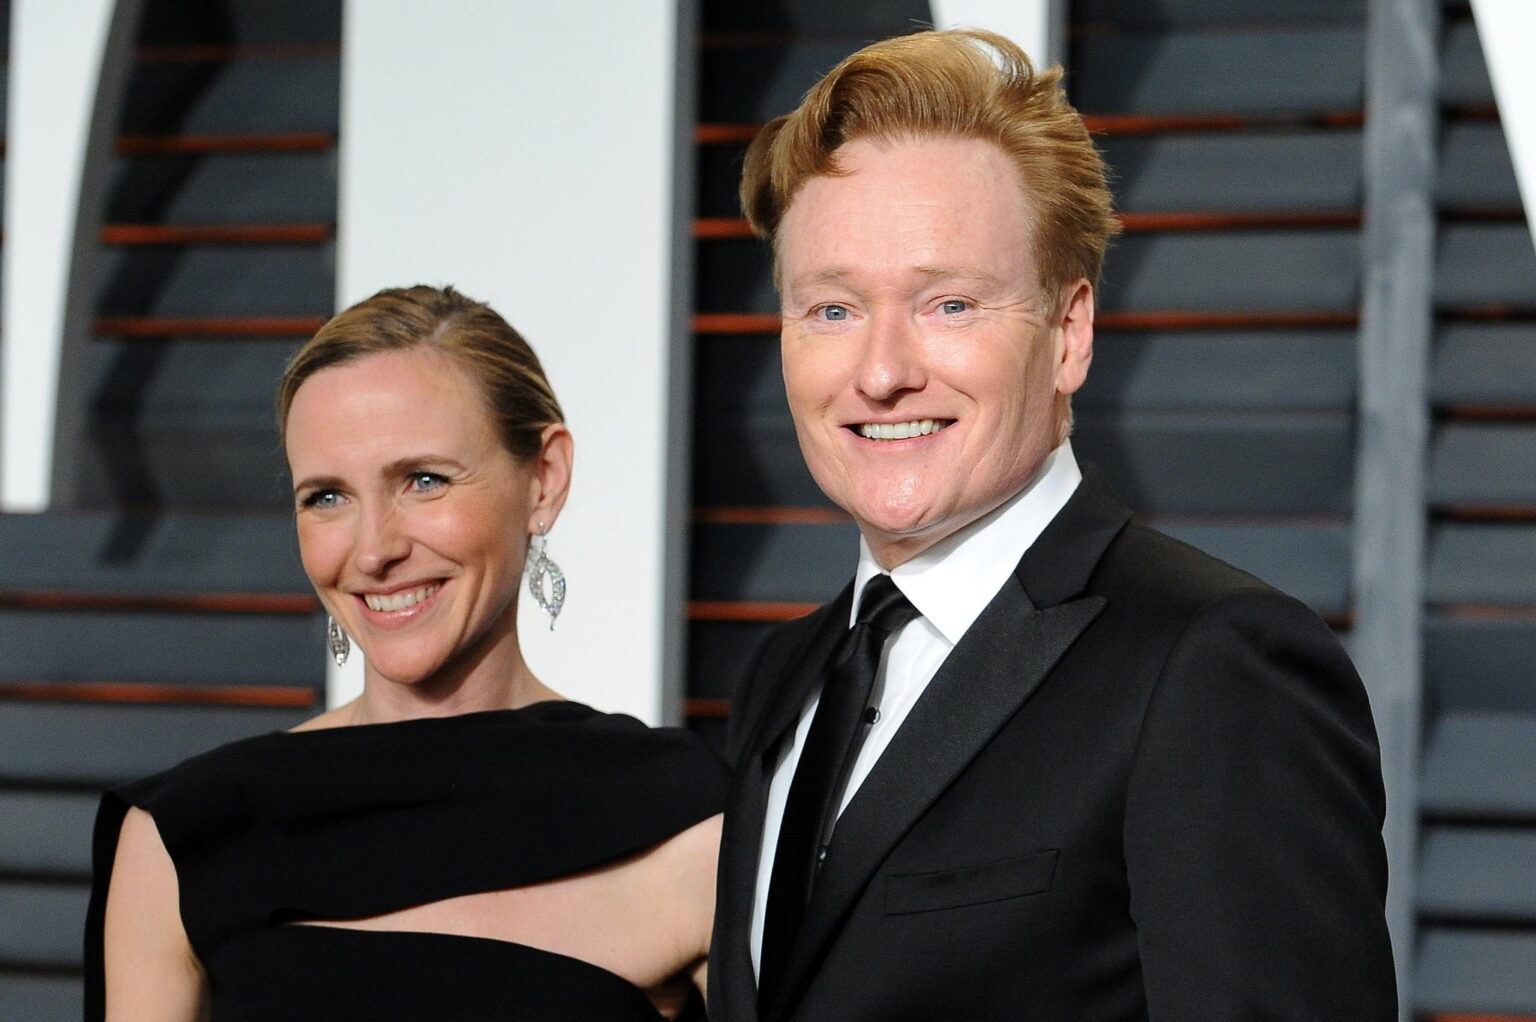 Conan O'Brien isn't the first name that comes to mind when you think cute romance stories. It will be when you read about how he met his wife!